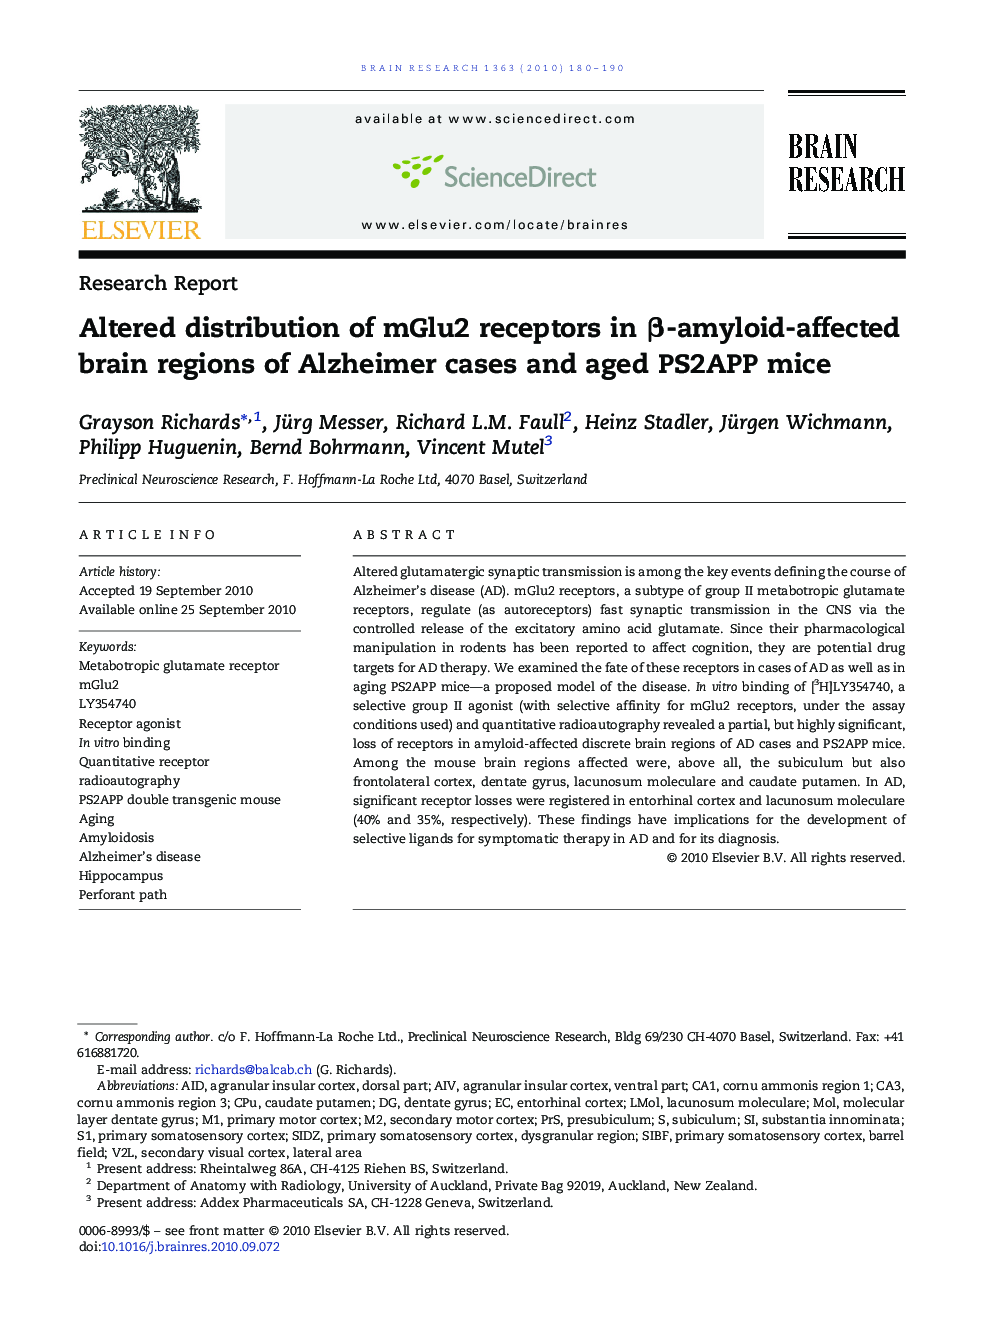 Altered distribution of mGlu2 receptors in β-amyloid-affected brain regions of Alzheimer cases and aged PS2APP mice